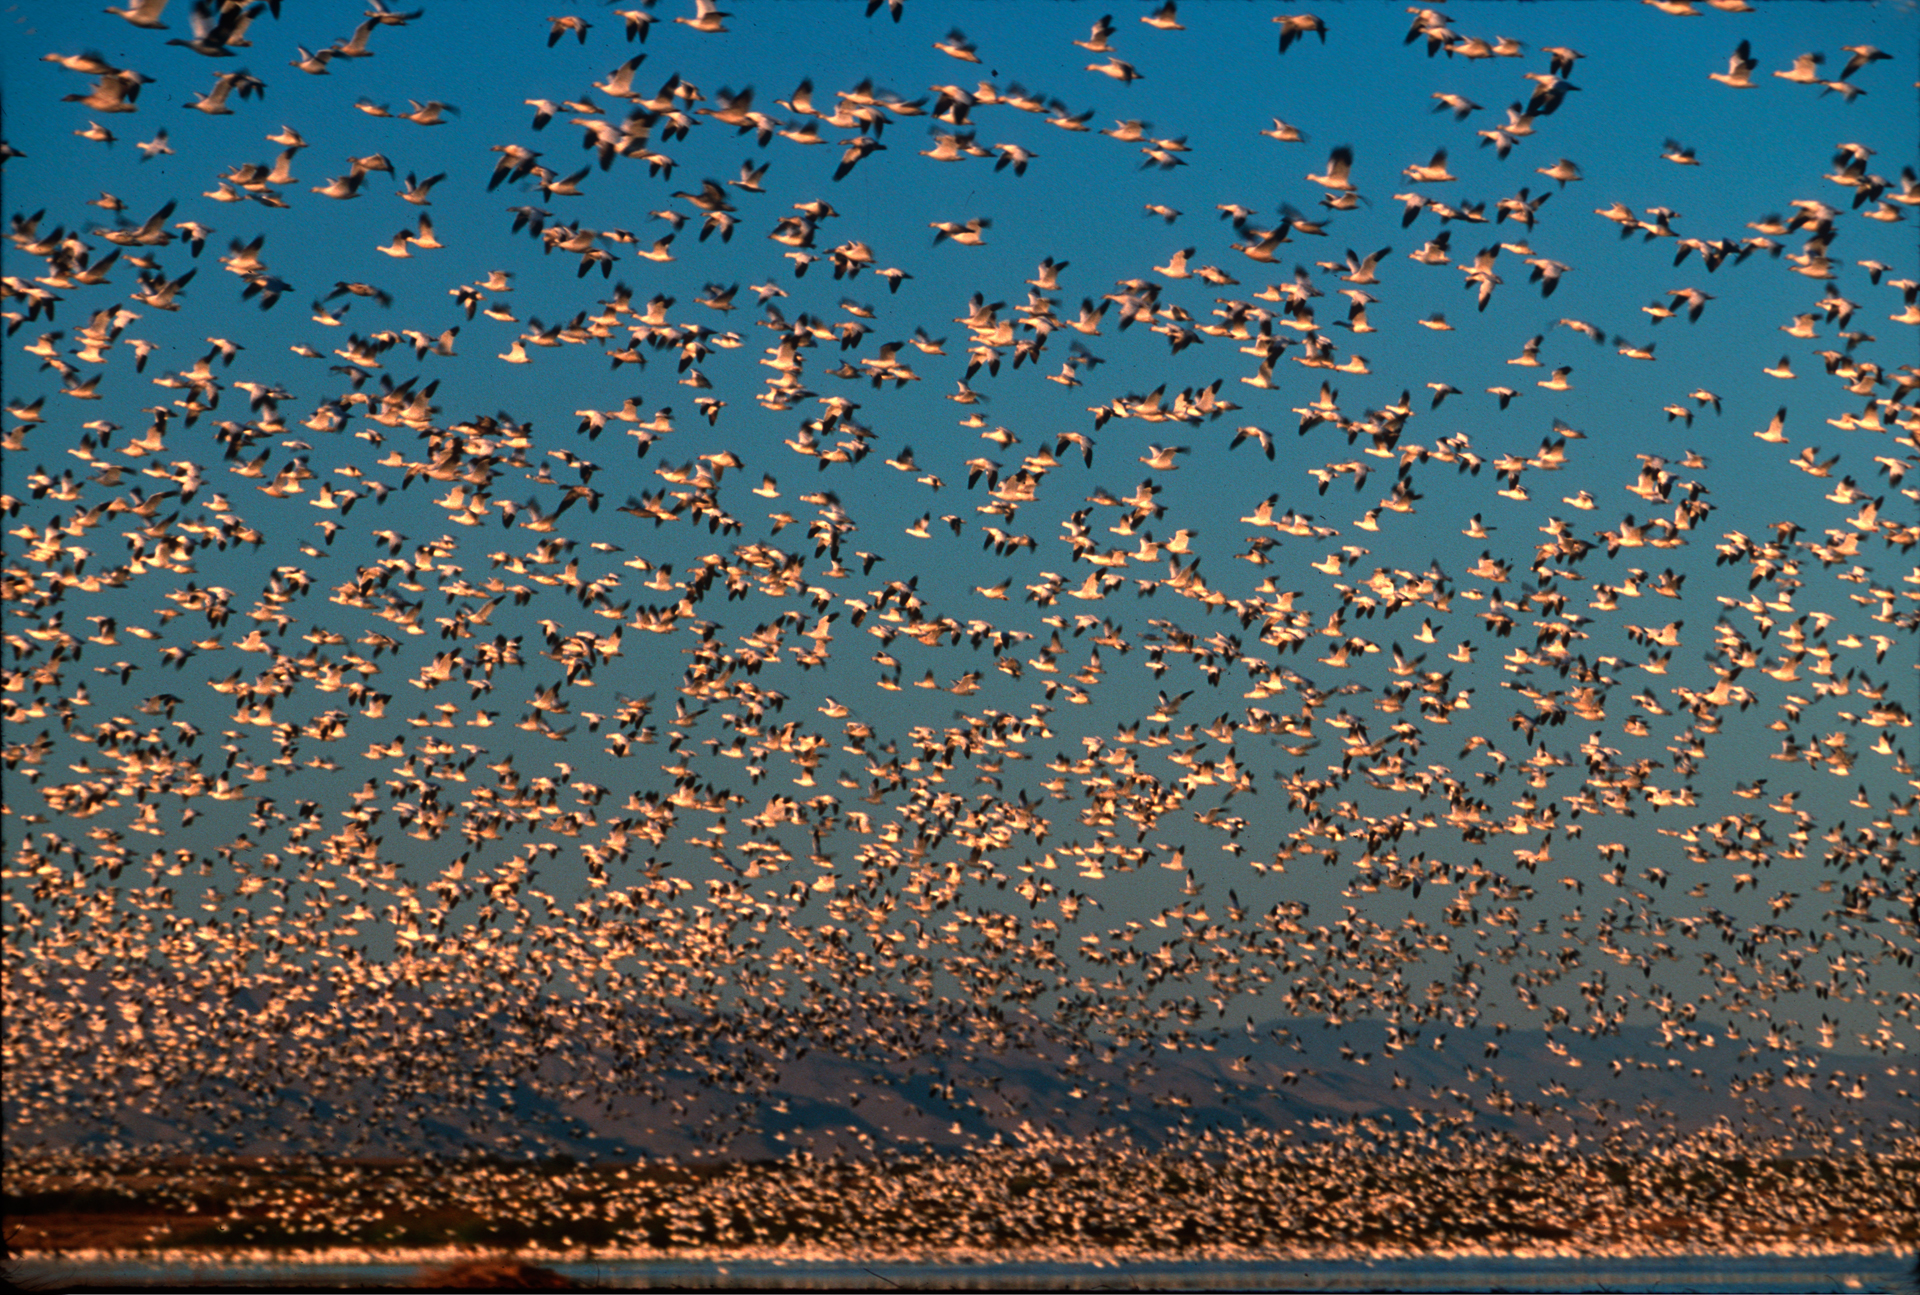  These snow geese are among the thousands of birds that use the Salton Sea for migration along the Pacific Flyway or as a wintering site.  Calipatria  